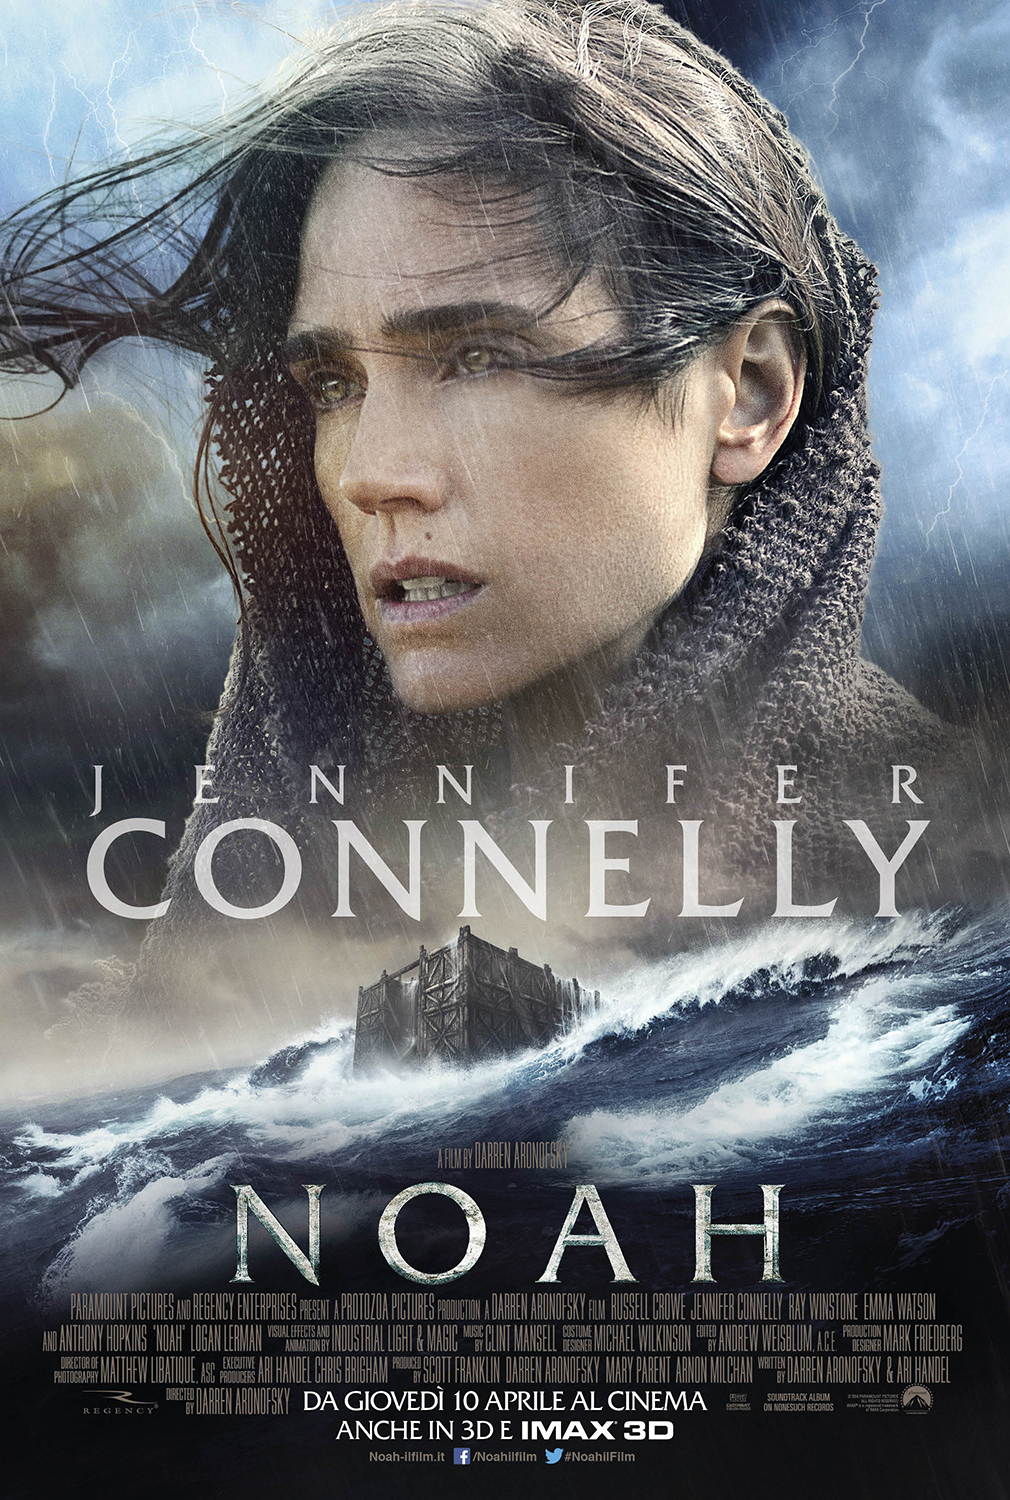 Noah character poster Connelly